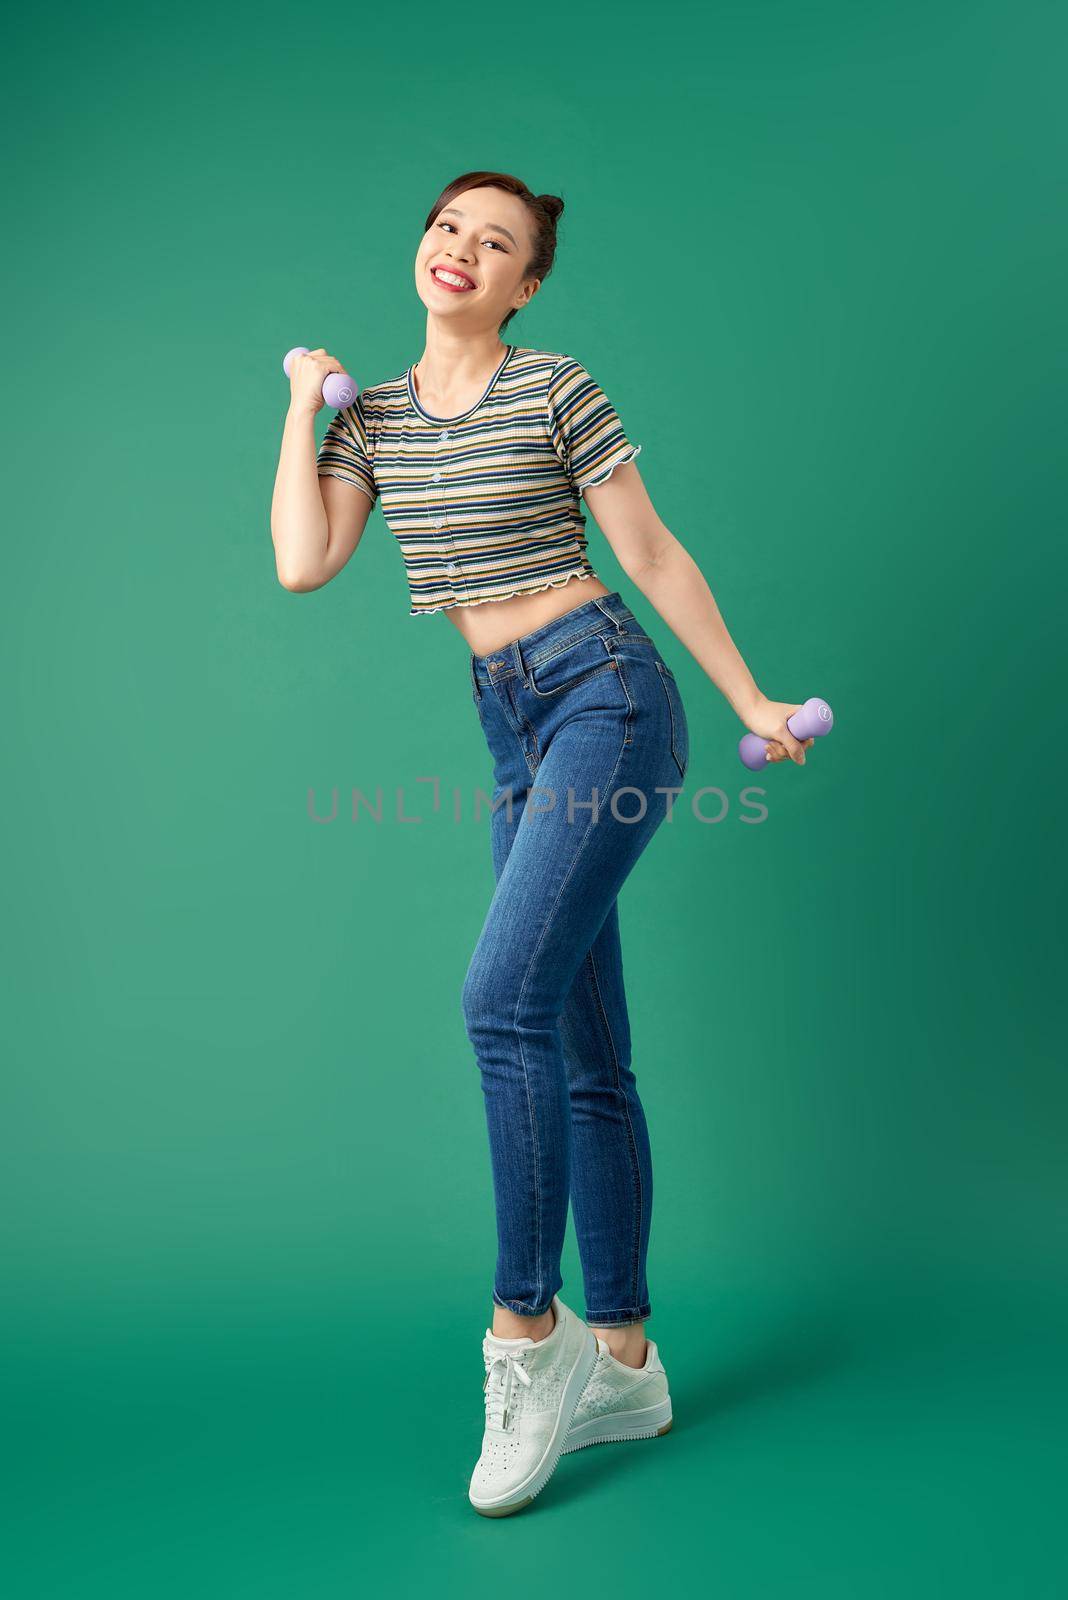 Attractive young Asian woman holding dumbell while standing over green background. Full length.